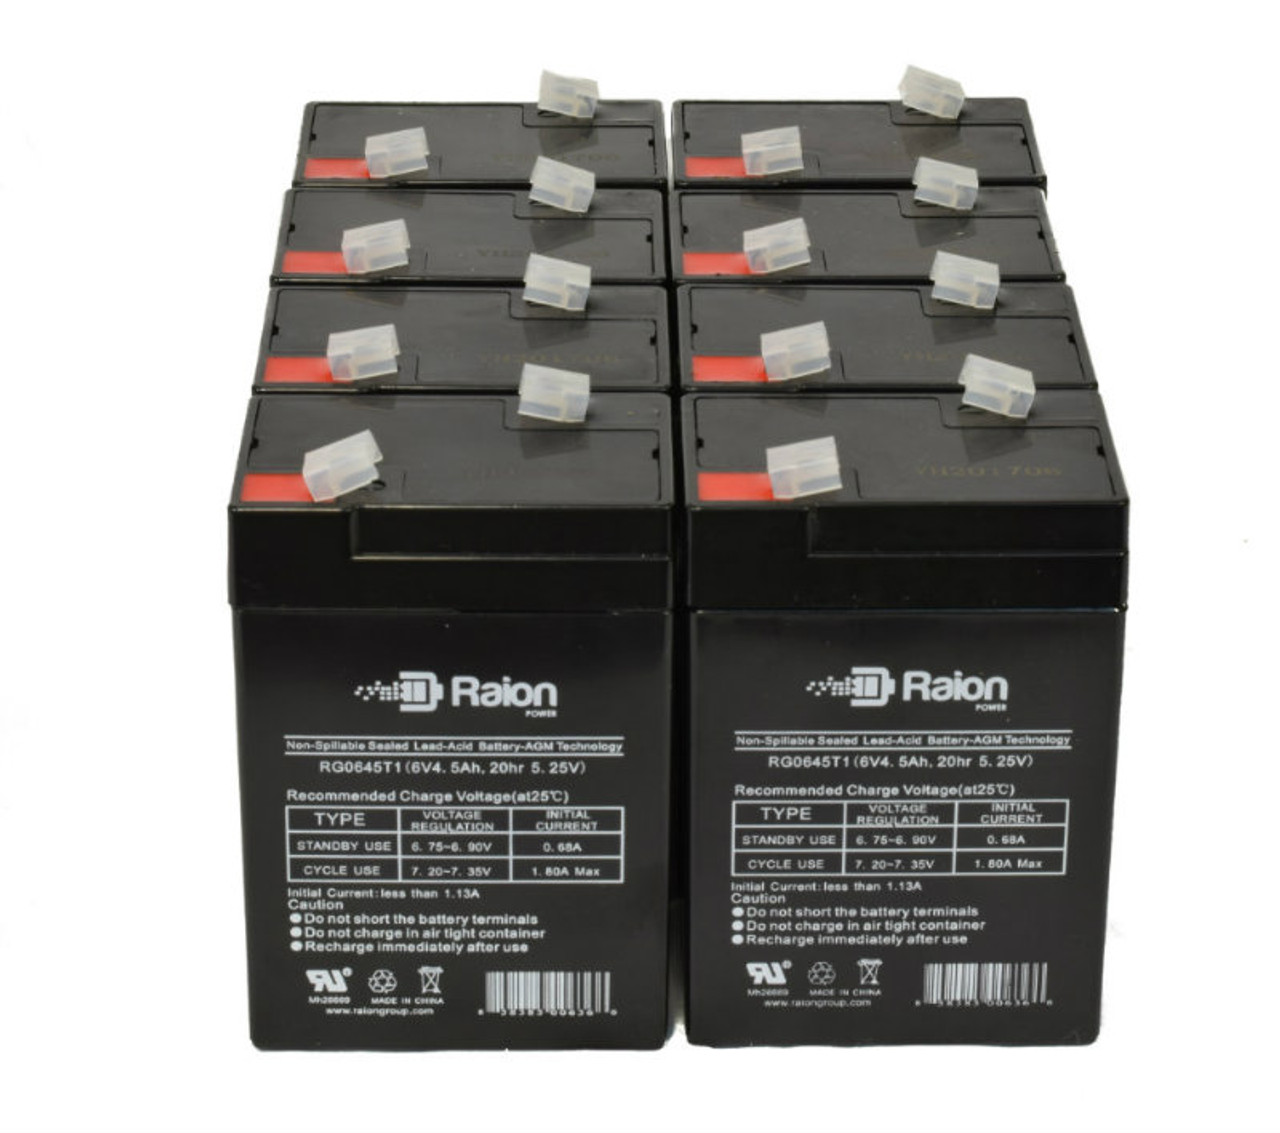 Raion Power 6V 4.5Ah Replacement Emergency Light Battery for ELS FRX - 8 Pack